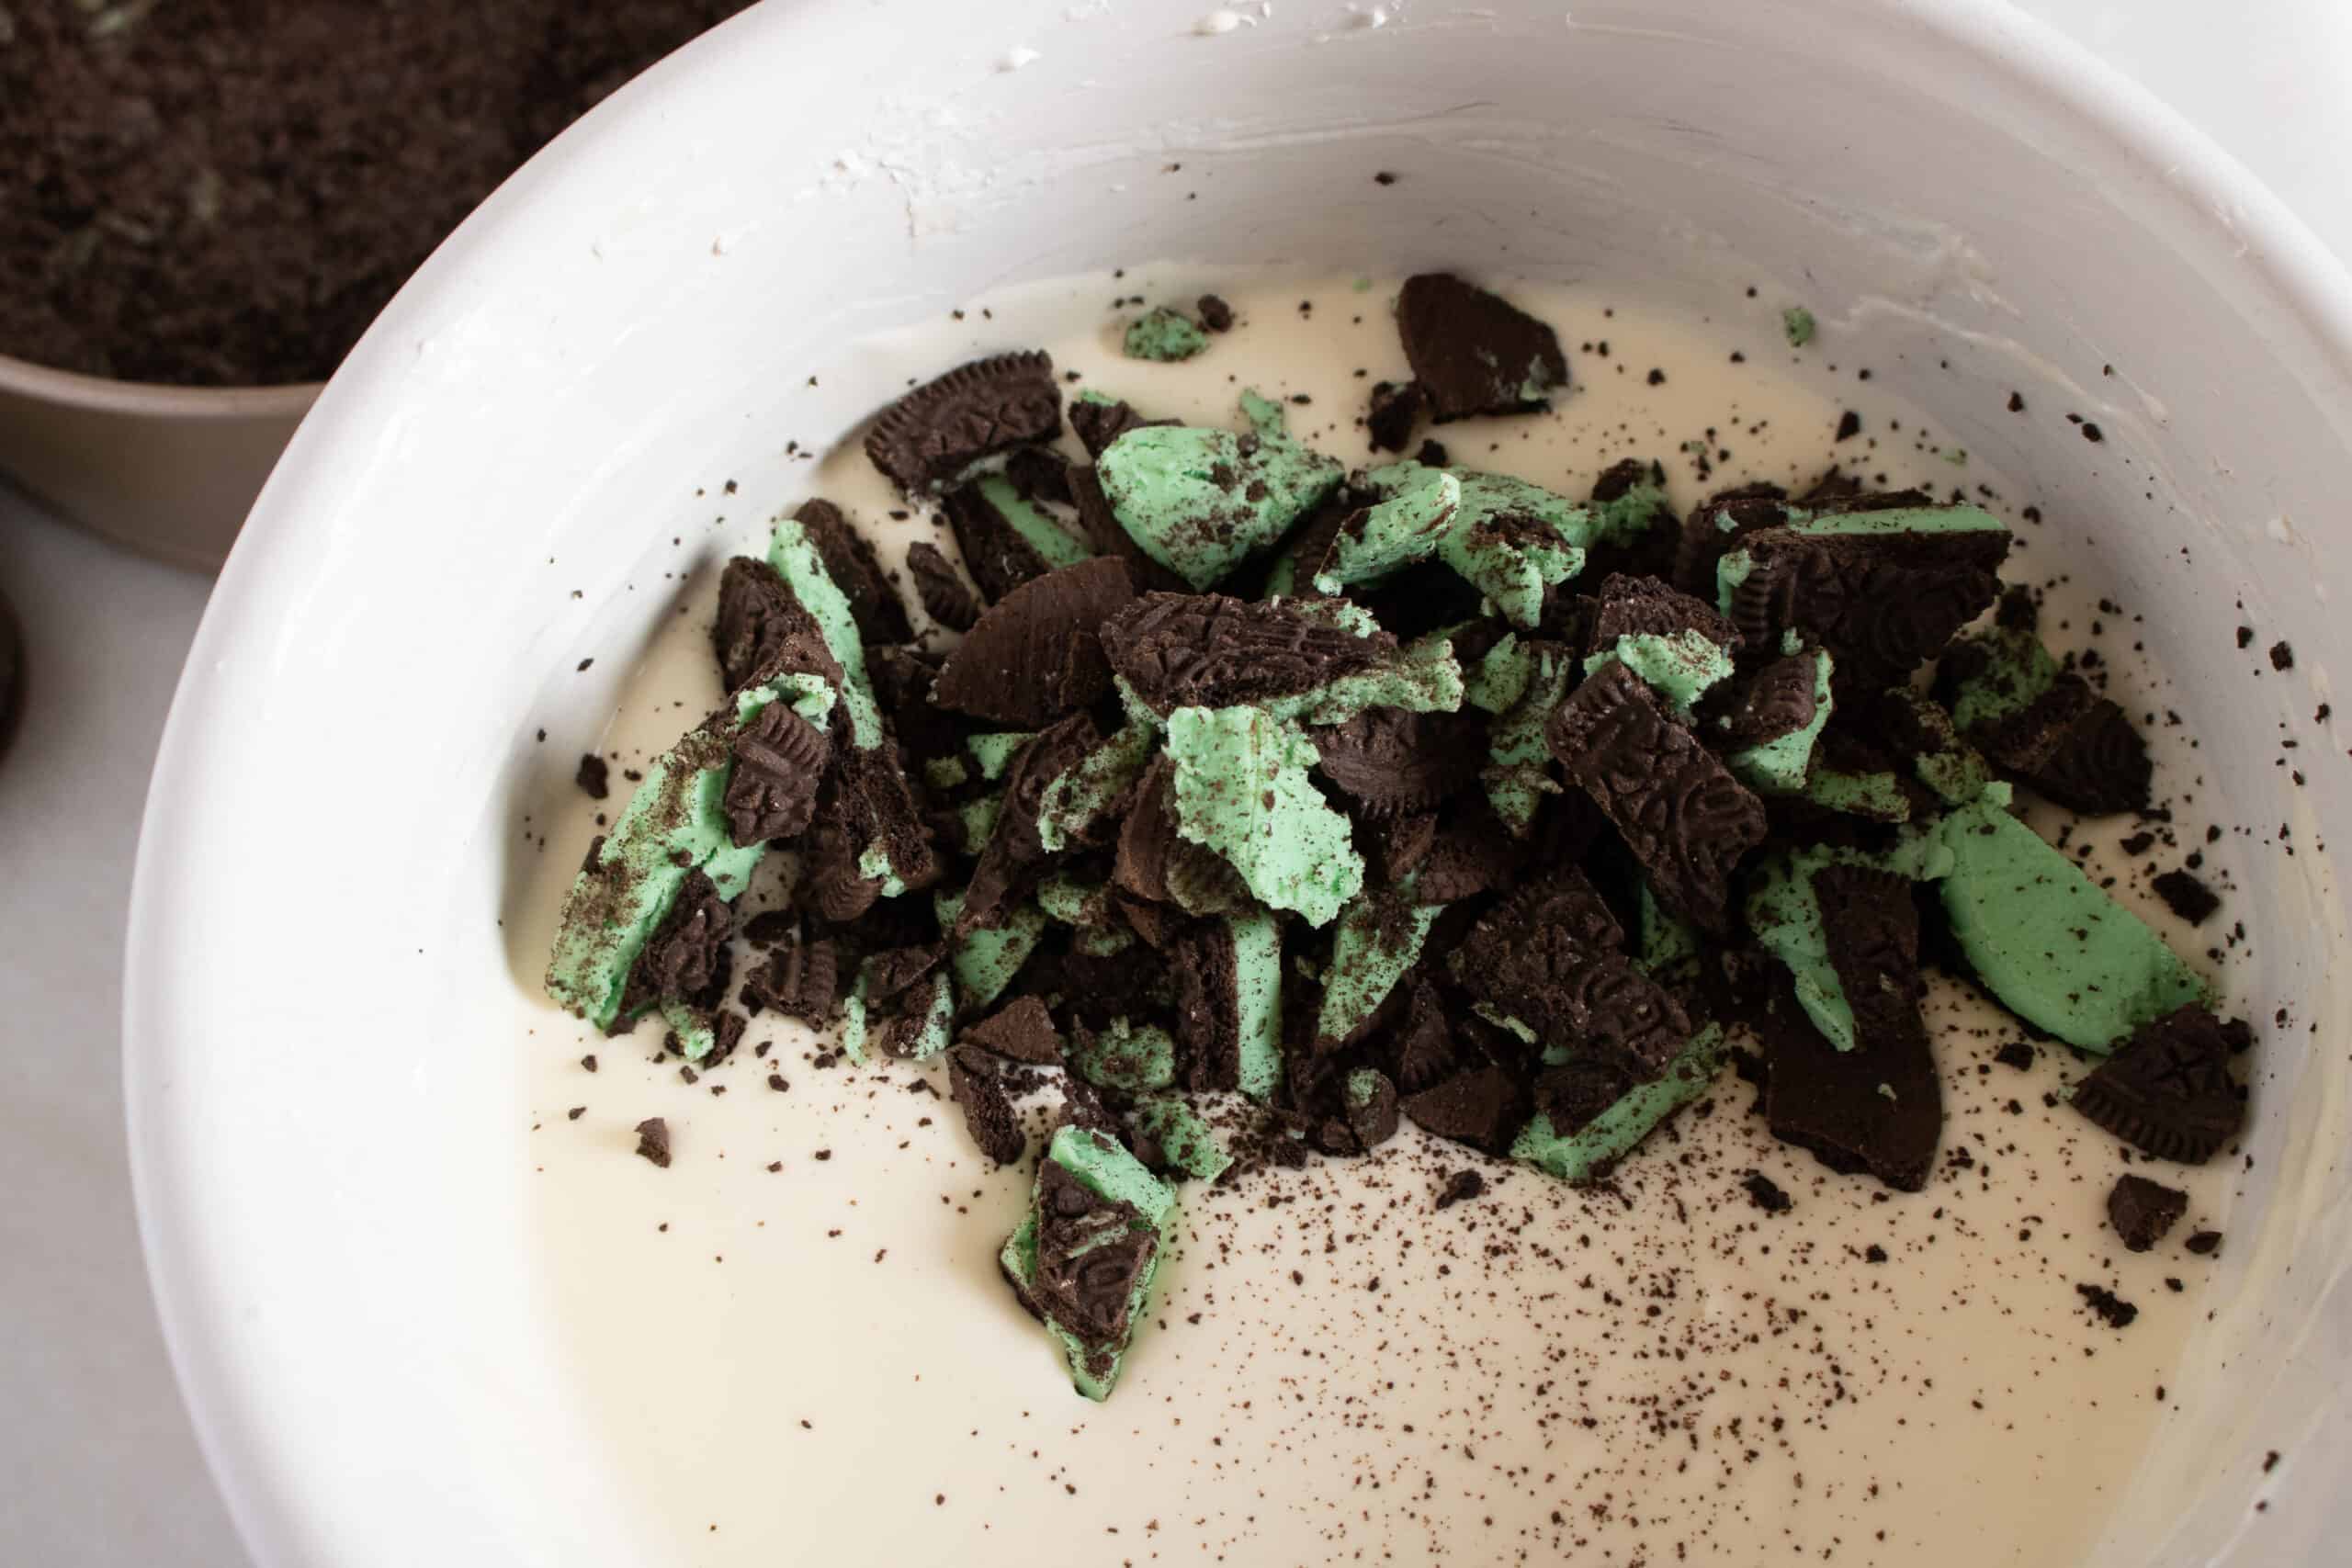 Instant Pot Mint Cheesecake